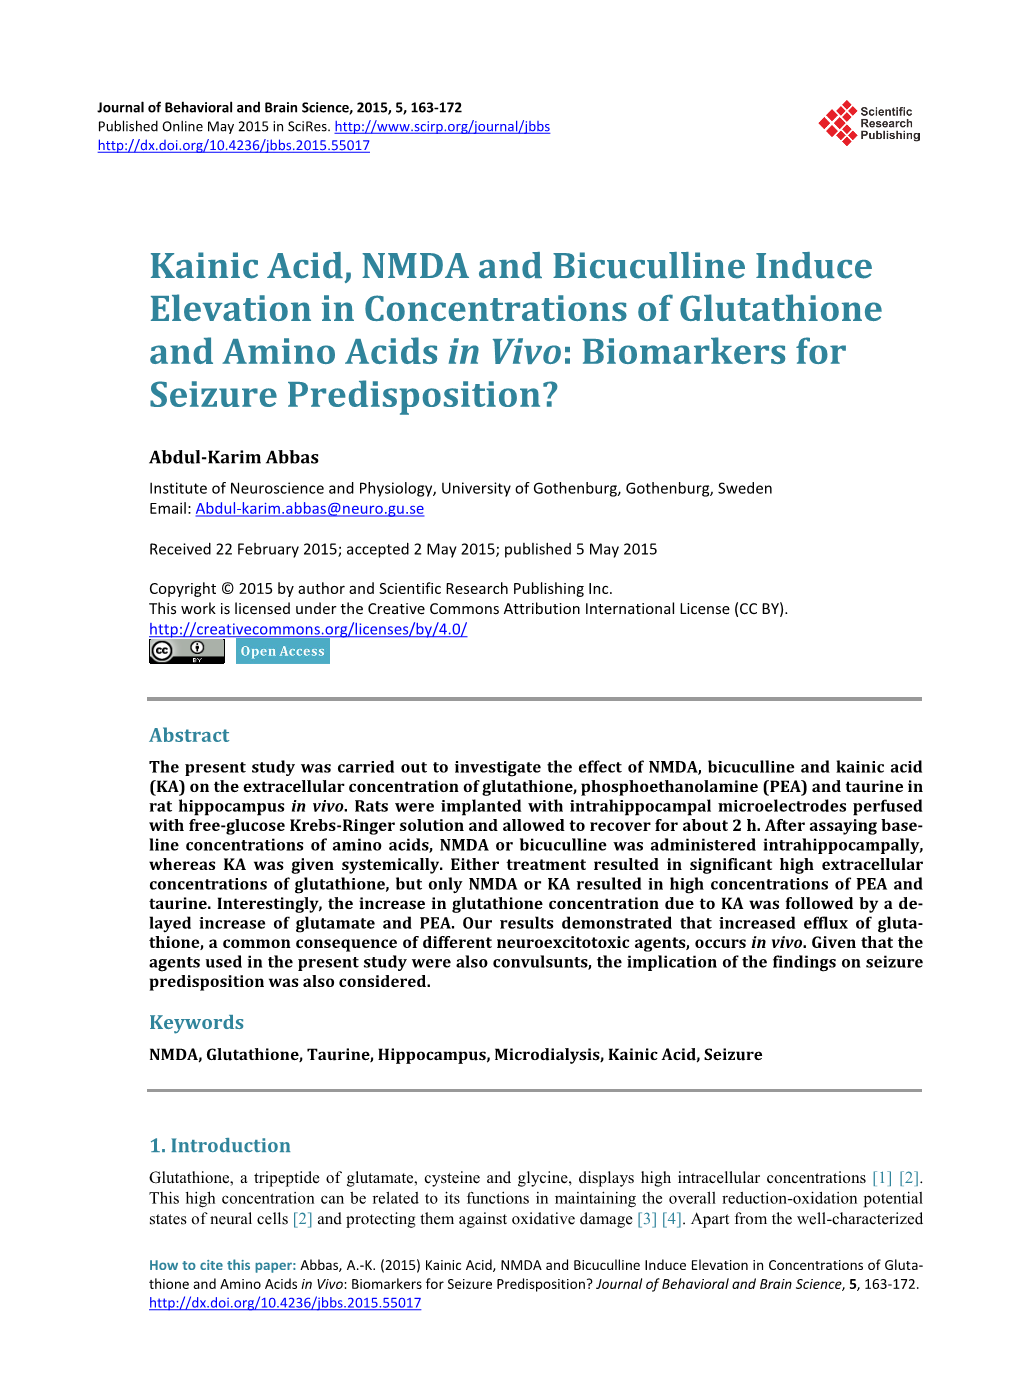 Kainic Acid, NMDA and Bicuculline Induce Elevation in Concentrations of Glutathione and Amino Acids in Vivo: Biomarkers for Seizure Predisposition?